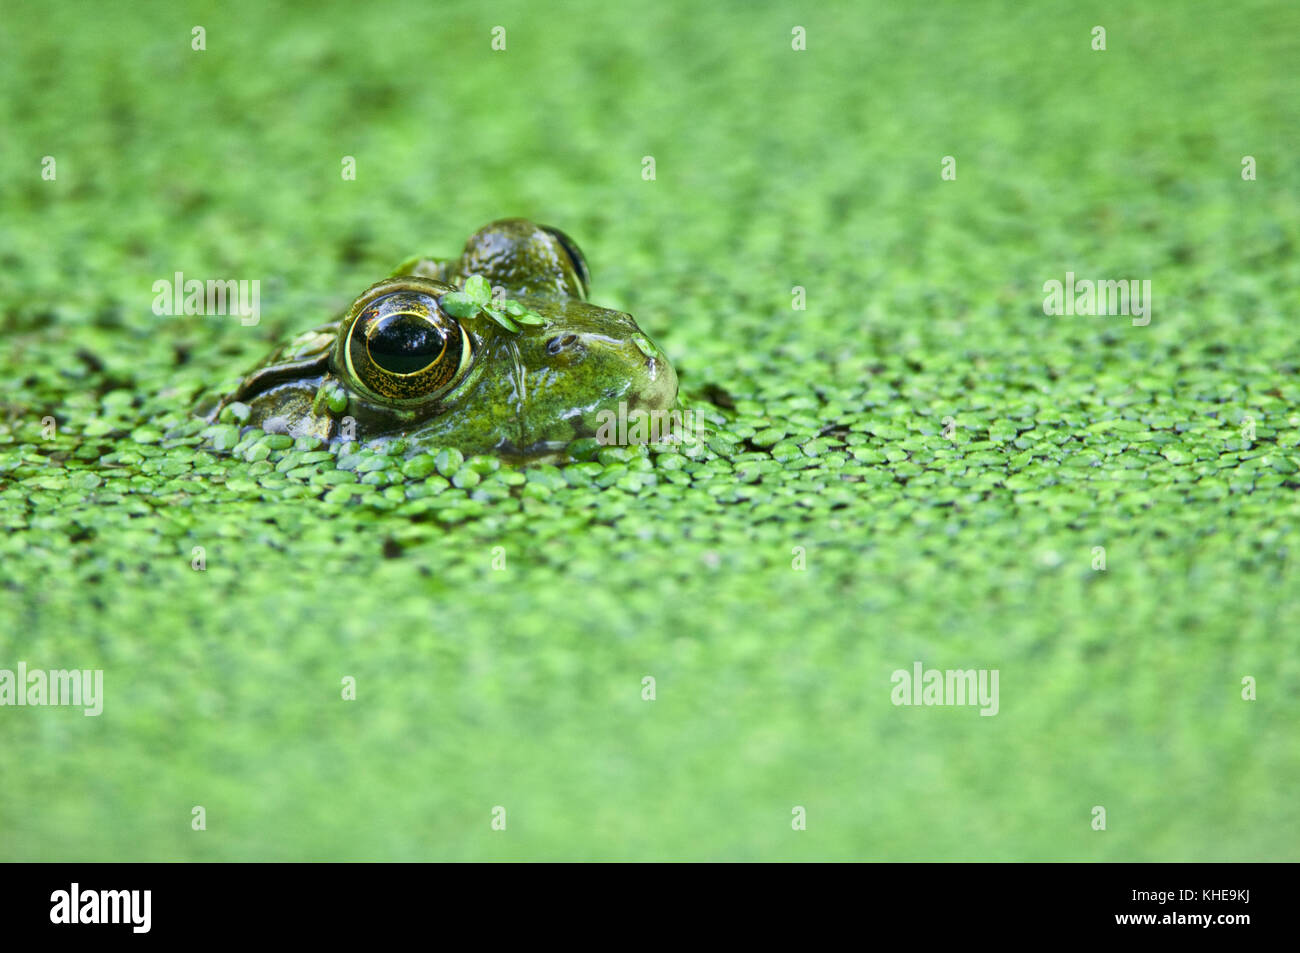 Green frog submerged in duckweed filled pond in Michigan, United States, Eastern North America Stock Photo